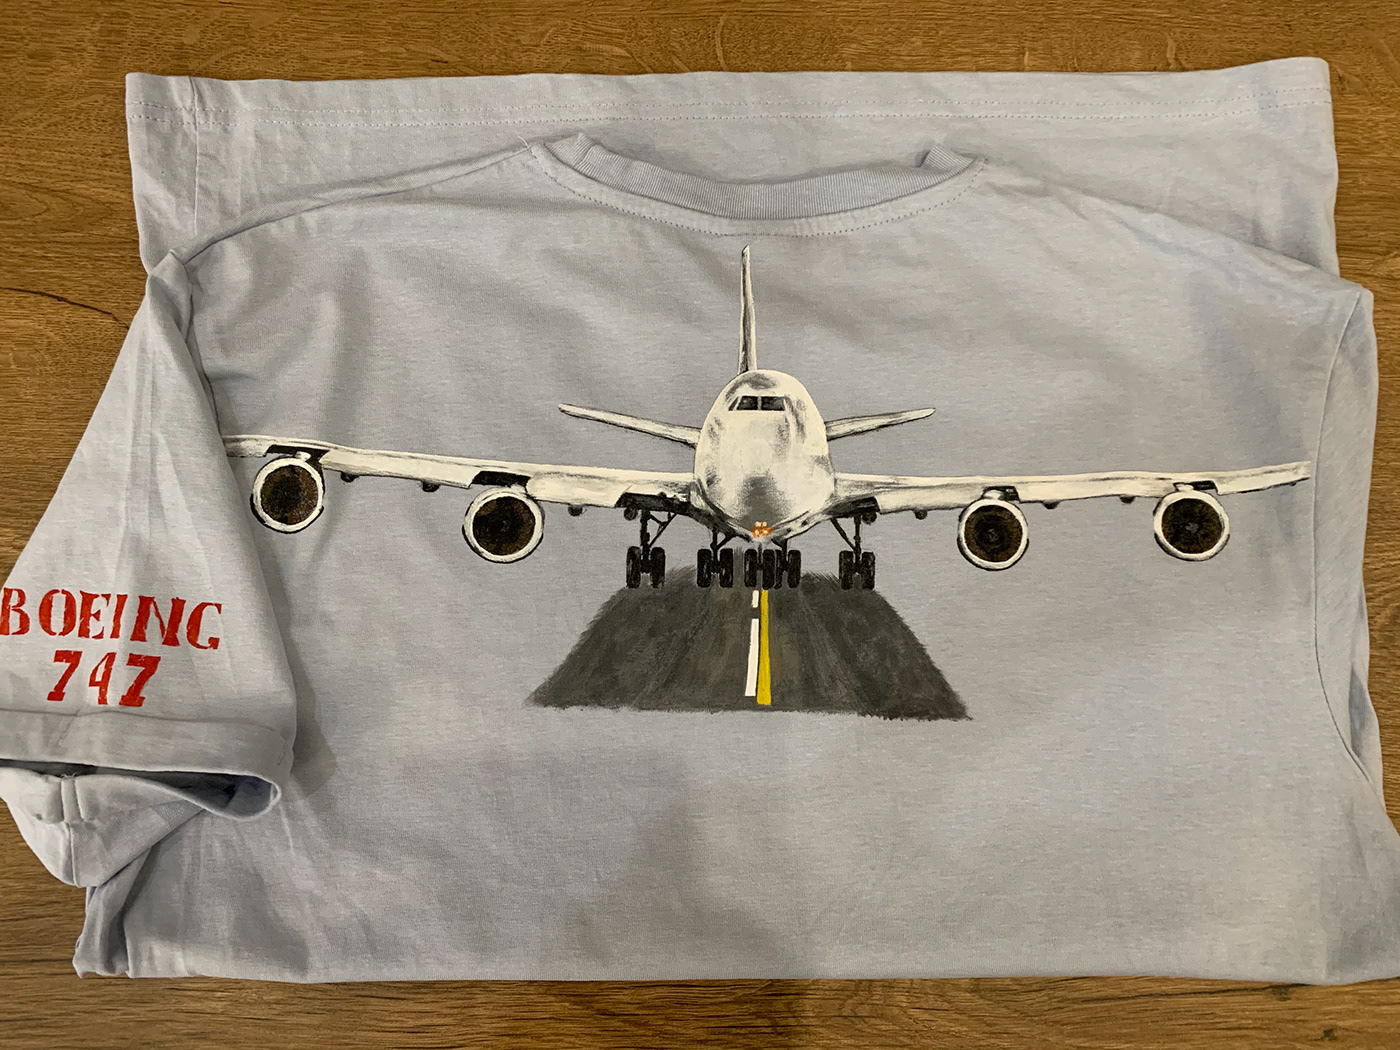 Boeing painting clothes